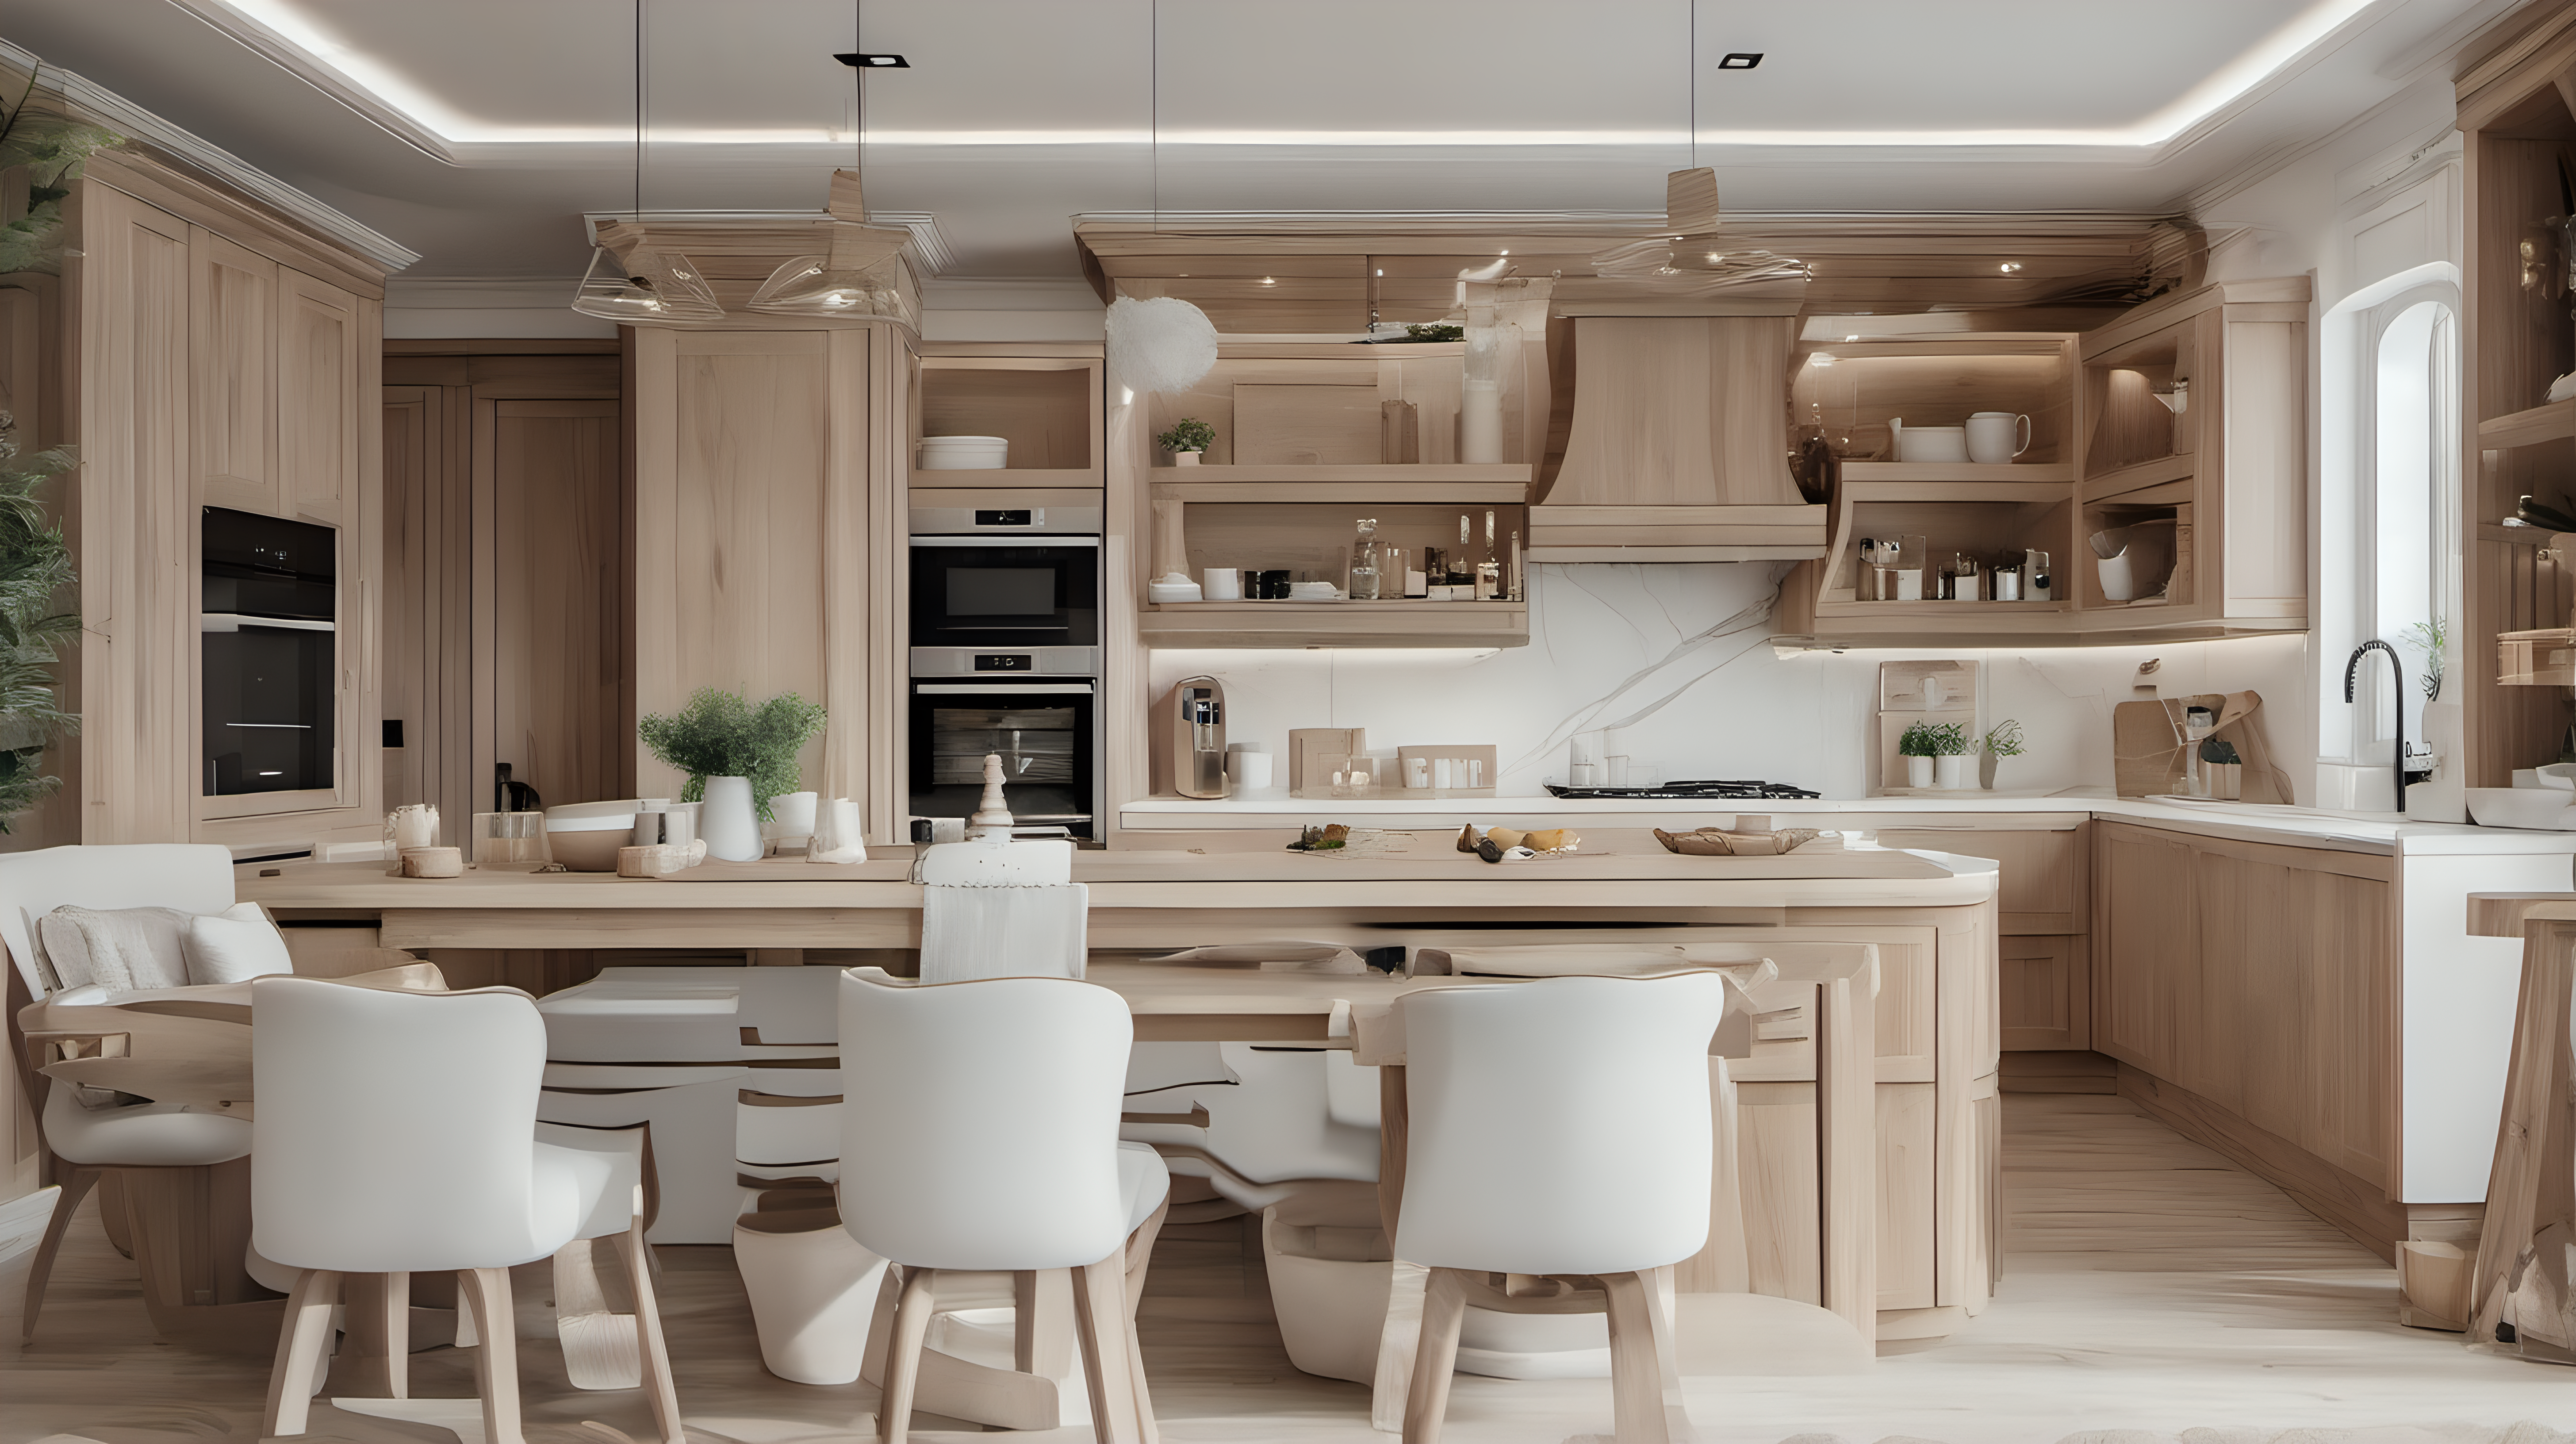 Interior big kitchen with beige  and white and wooden luxury details